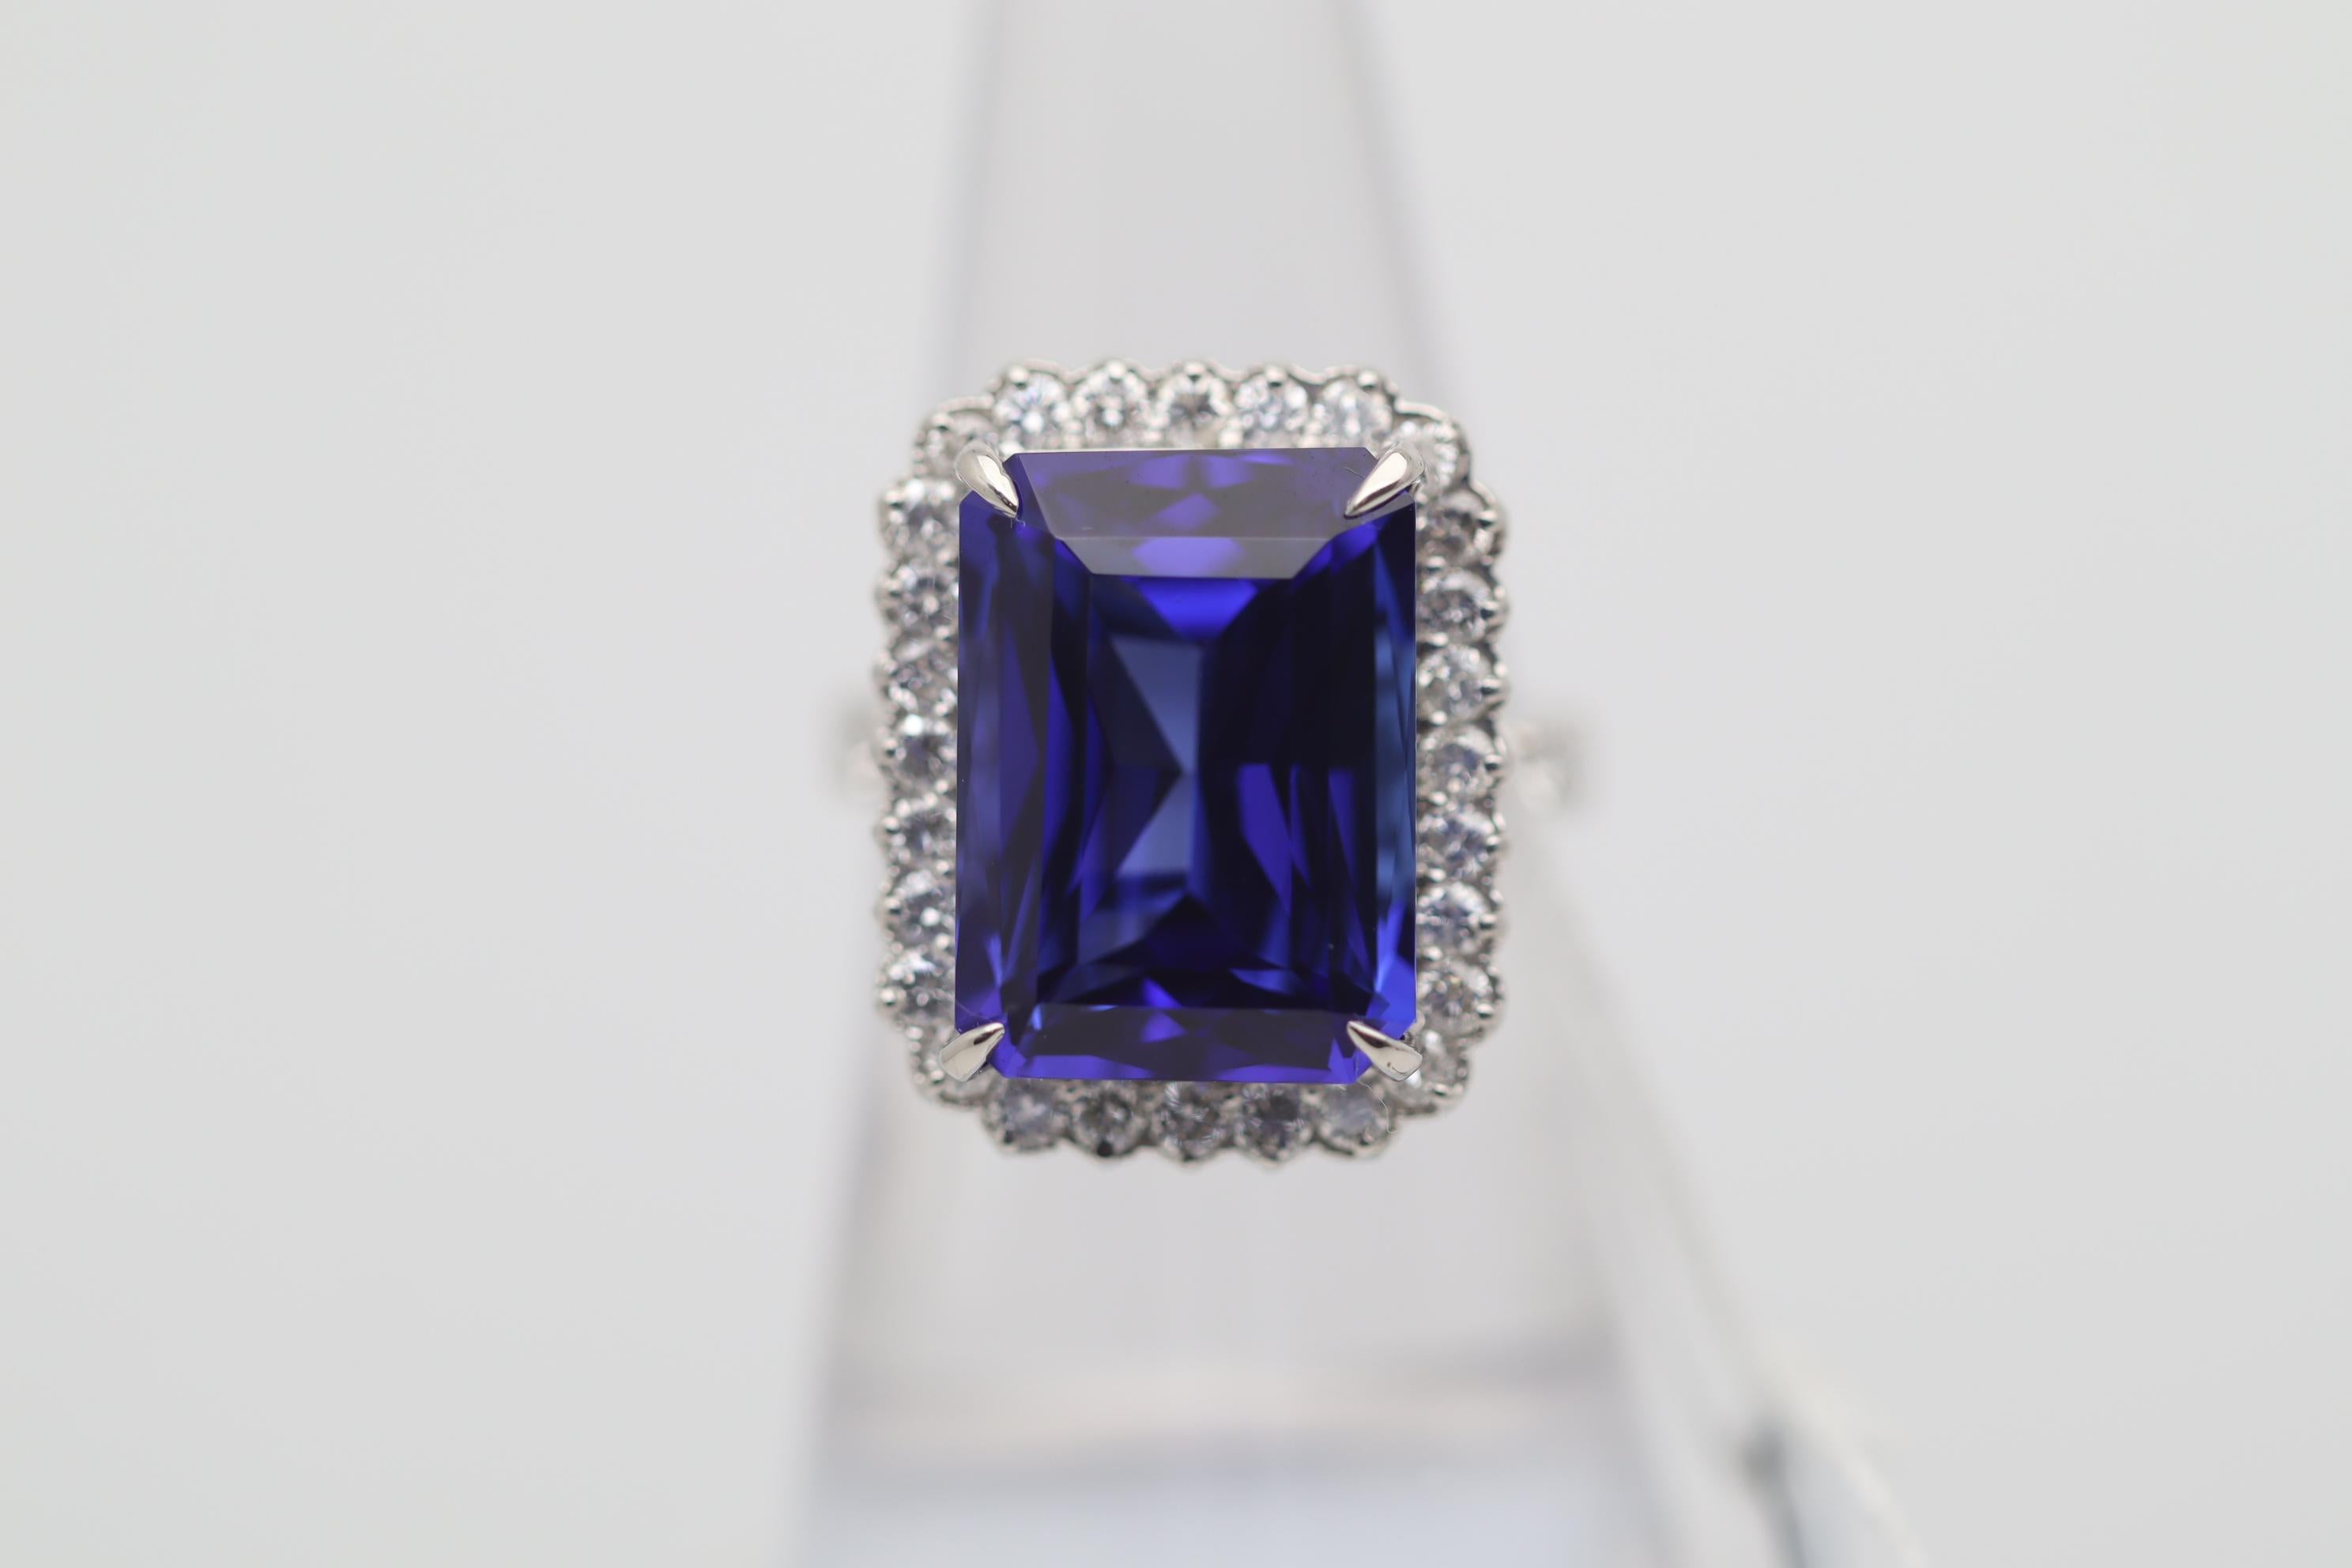 A large, fine, and impressive tanzanite weighing 14.07 carats takes center stage of this platinum made ring. It has a rich highly saturated purple-blue color and a lovely rectangular shape with fine faceting. It is complemented by 0.97 carats of